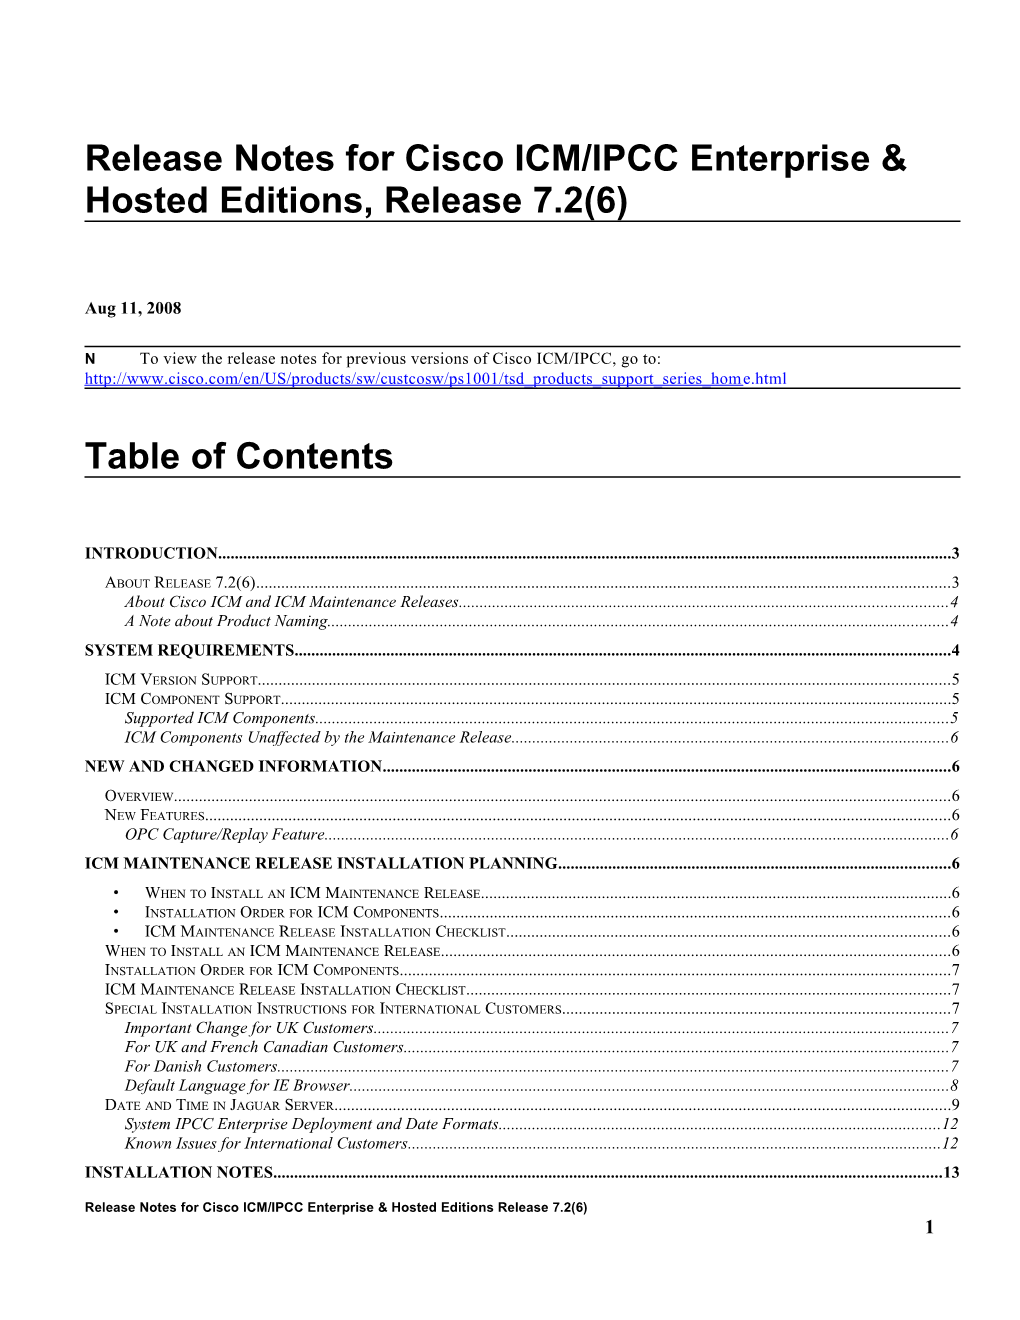 Release Notes for Cisco ICM/IPCC Enterprise & Hosted Editions Release 7